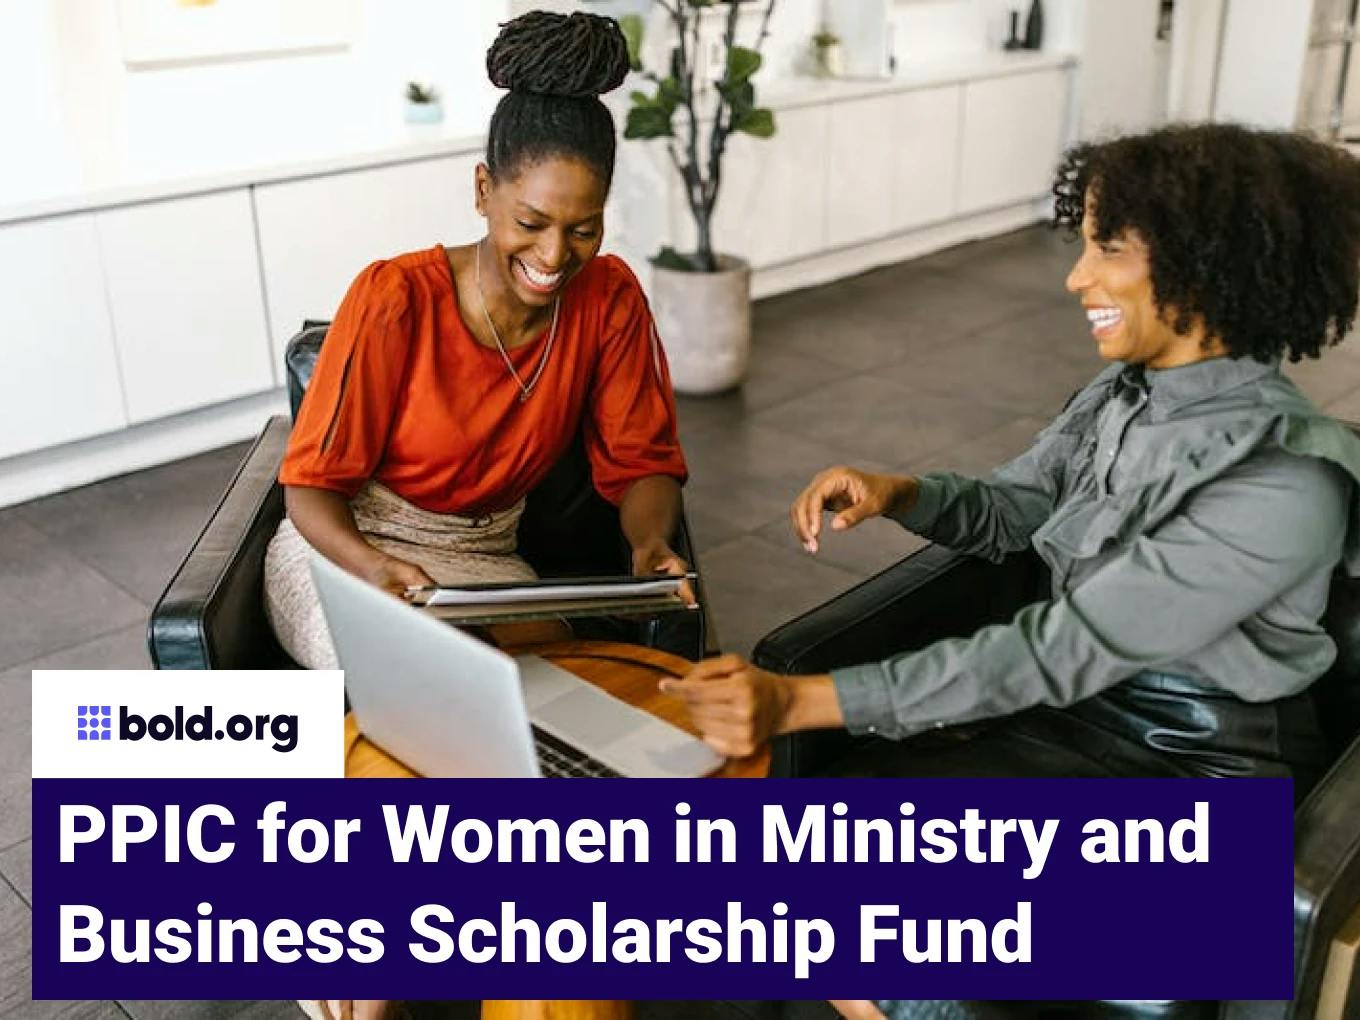 PPIC for Women in Ministry and Business Scholarship Fund